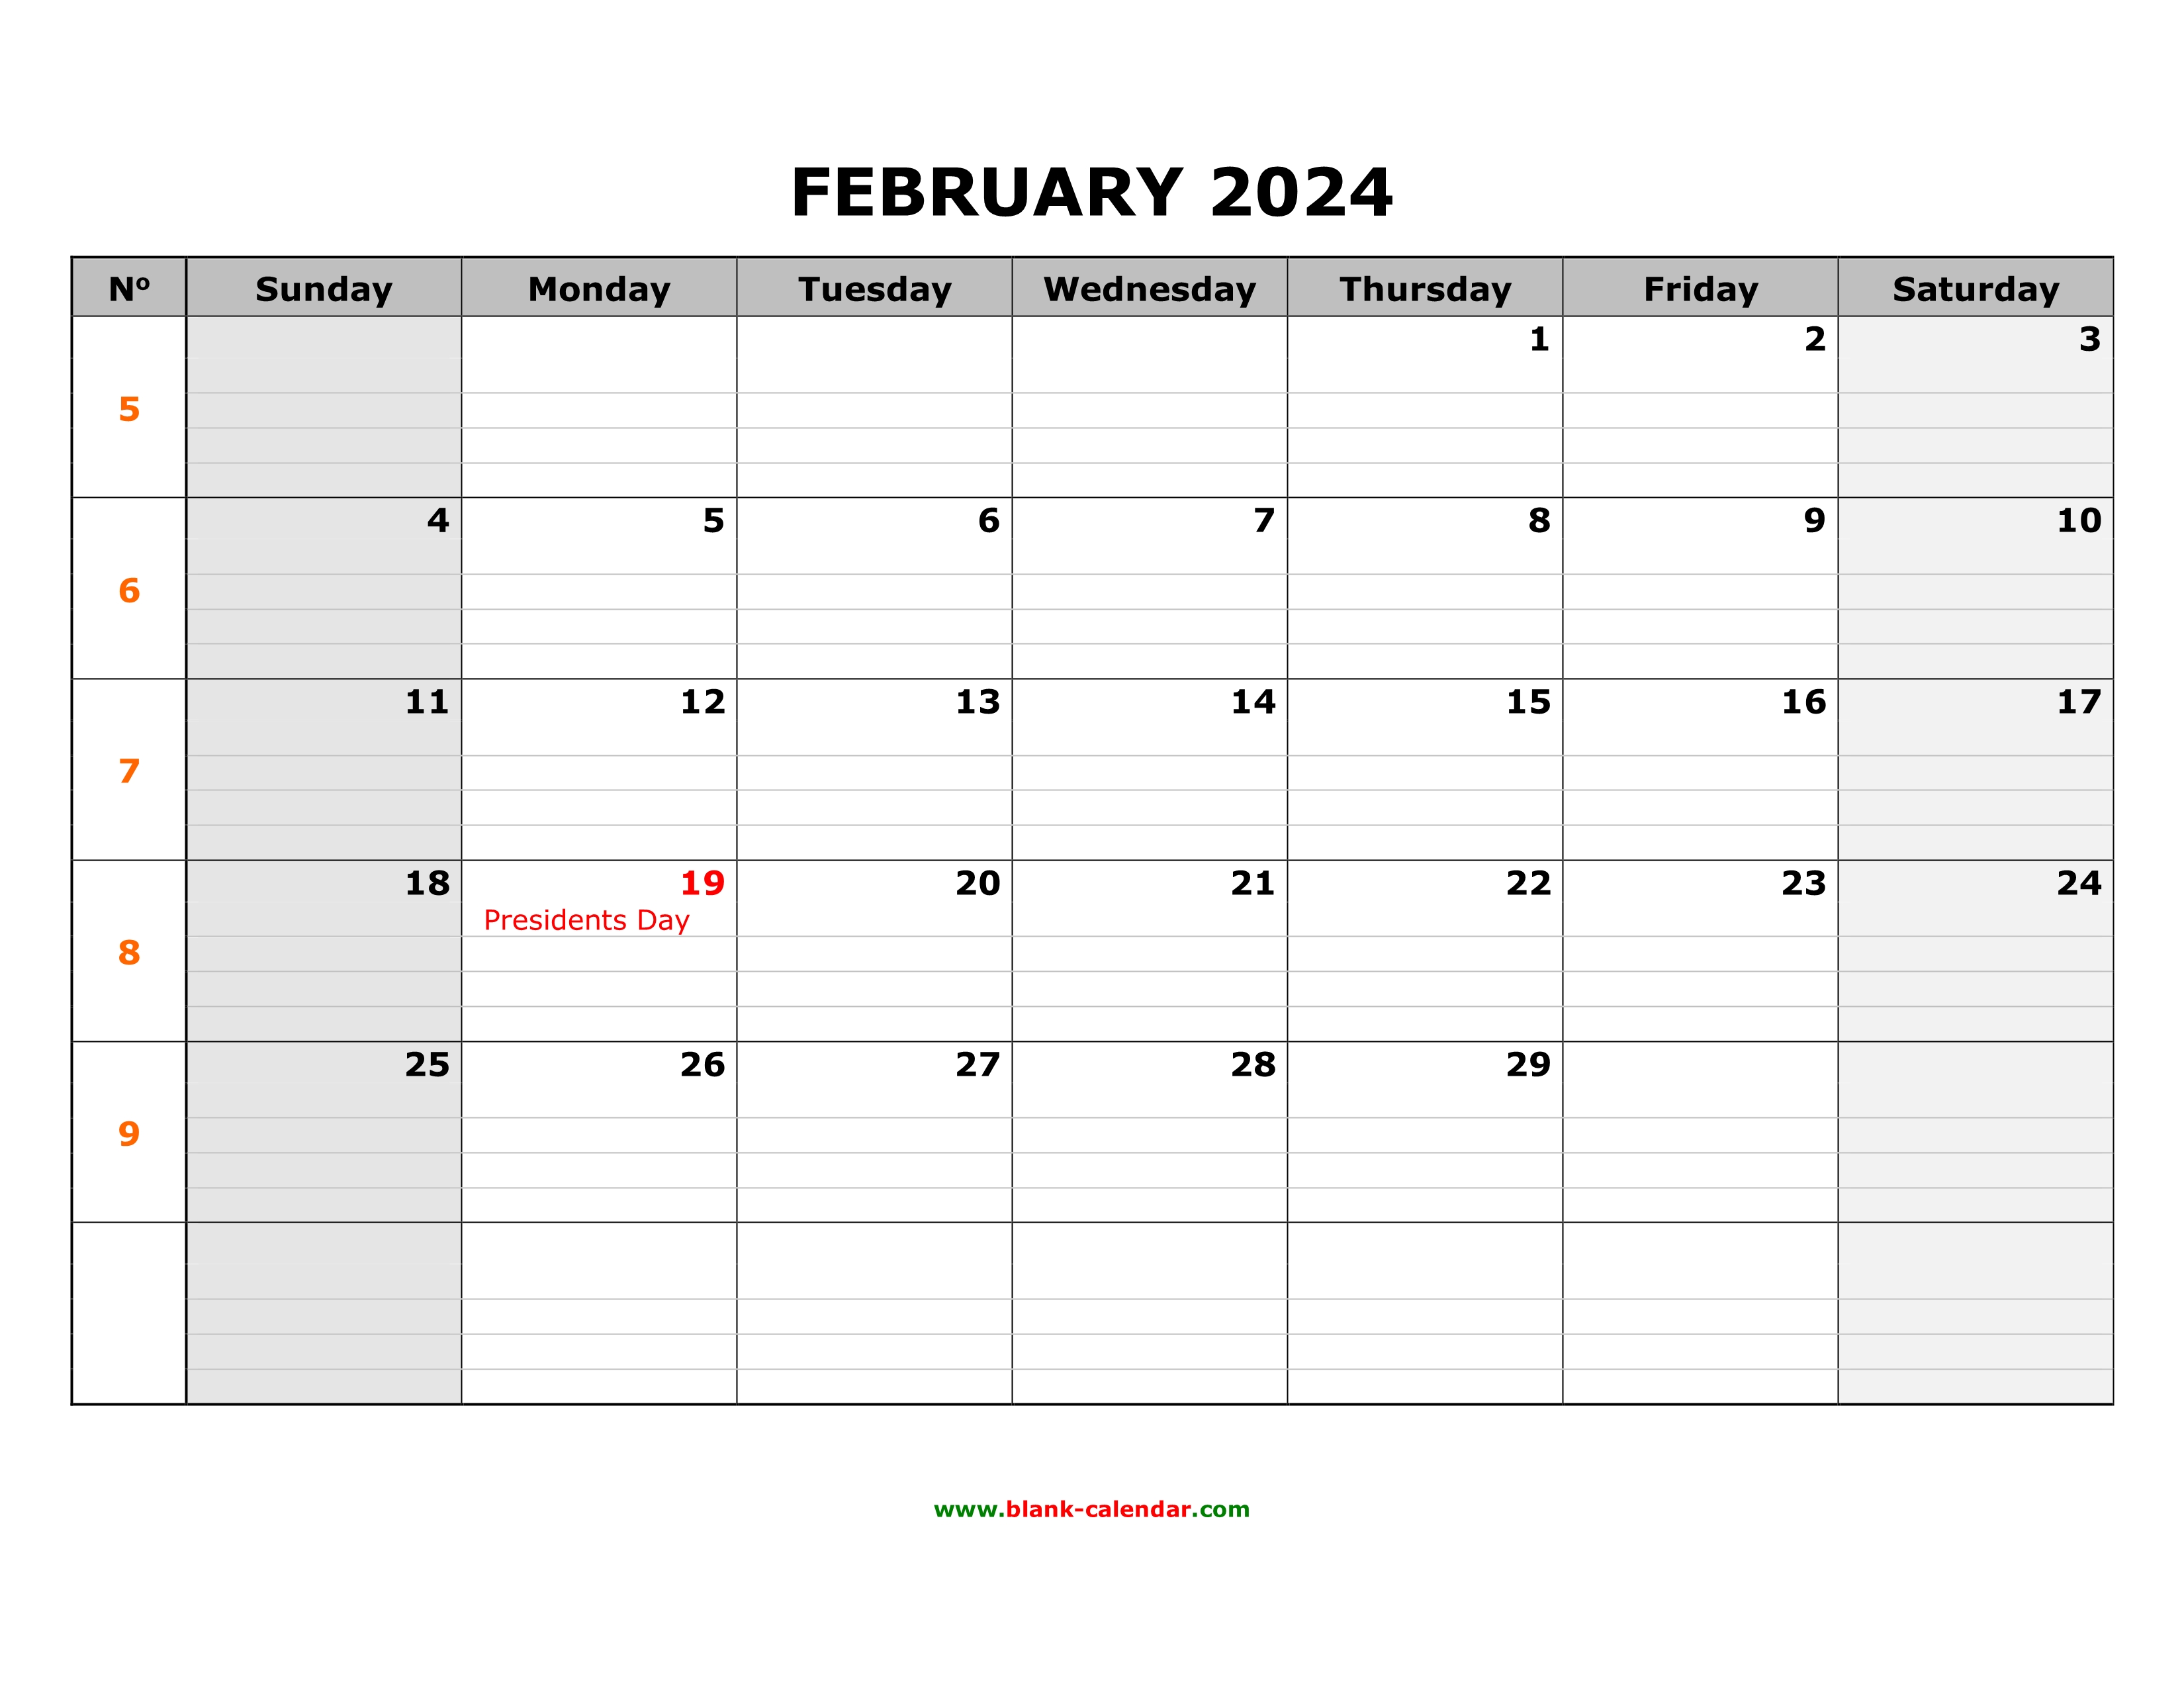 Create A Personalized Calendar For February 2024 Olympics Schedule